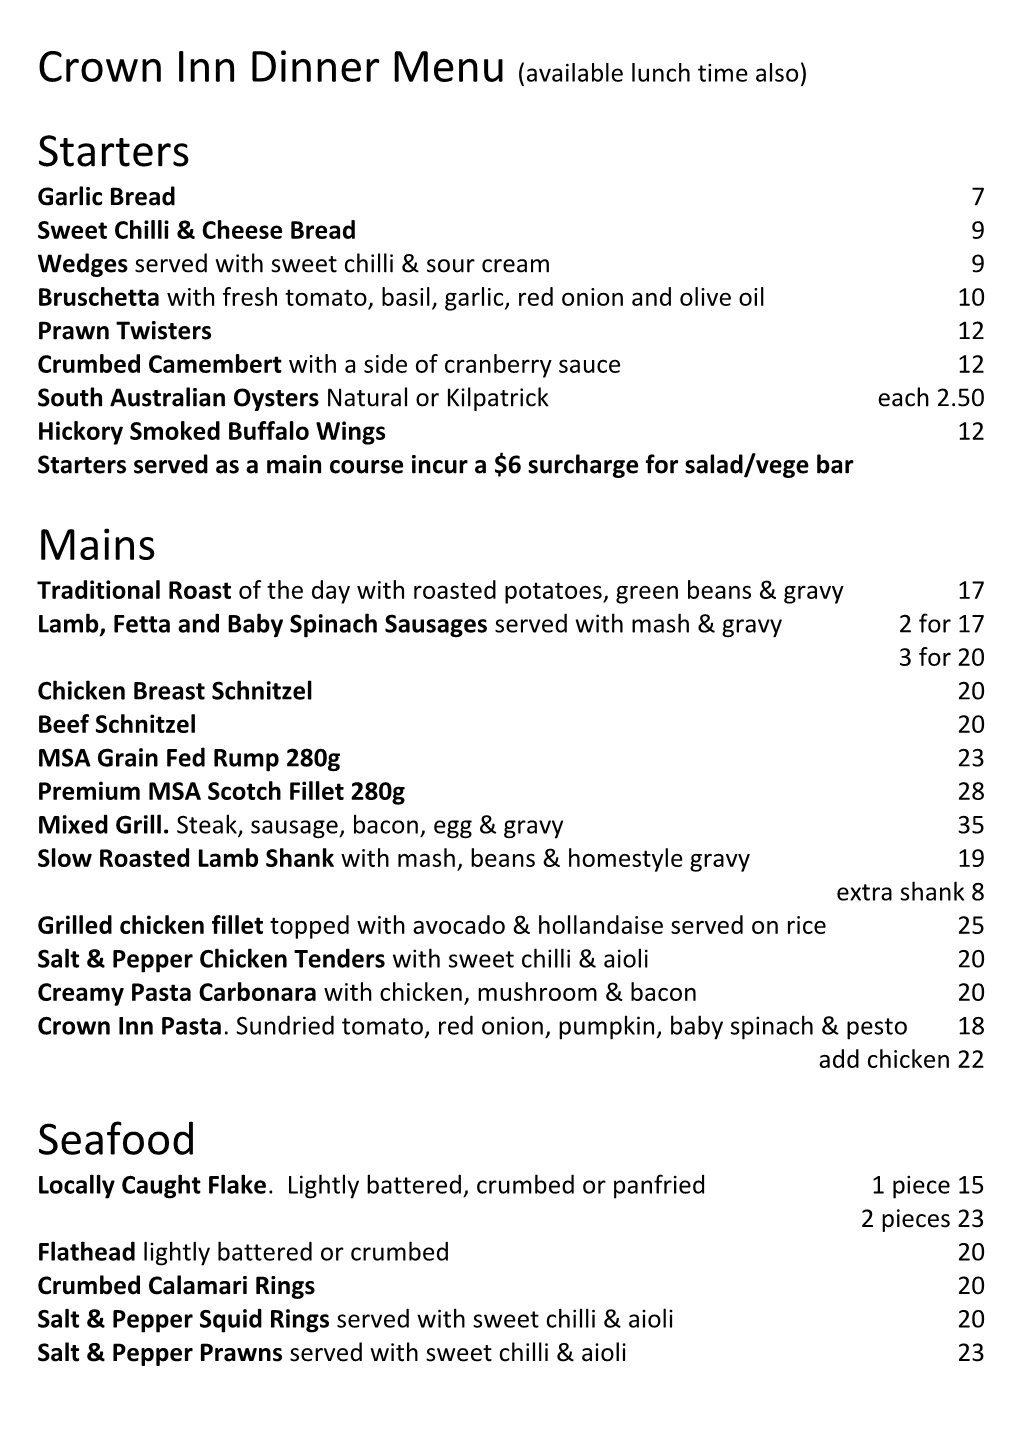 Crown Inn Dinner Menu (Available Lunch Time Also)